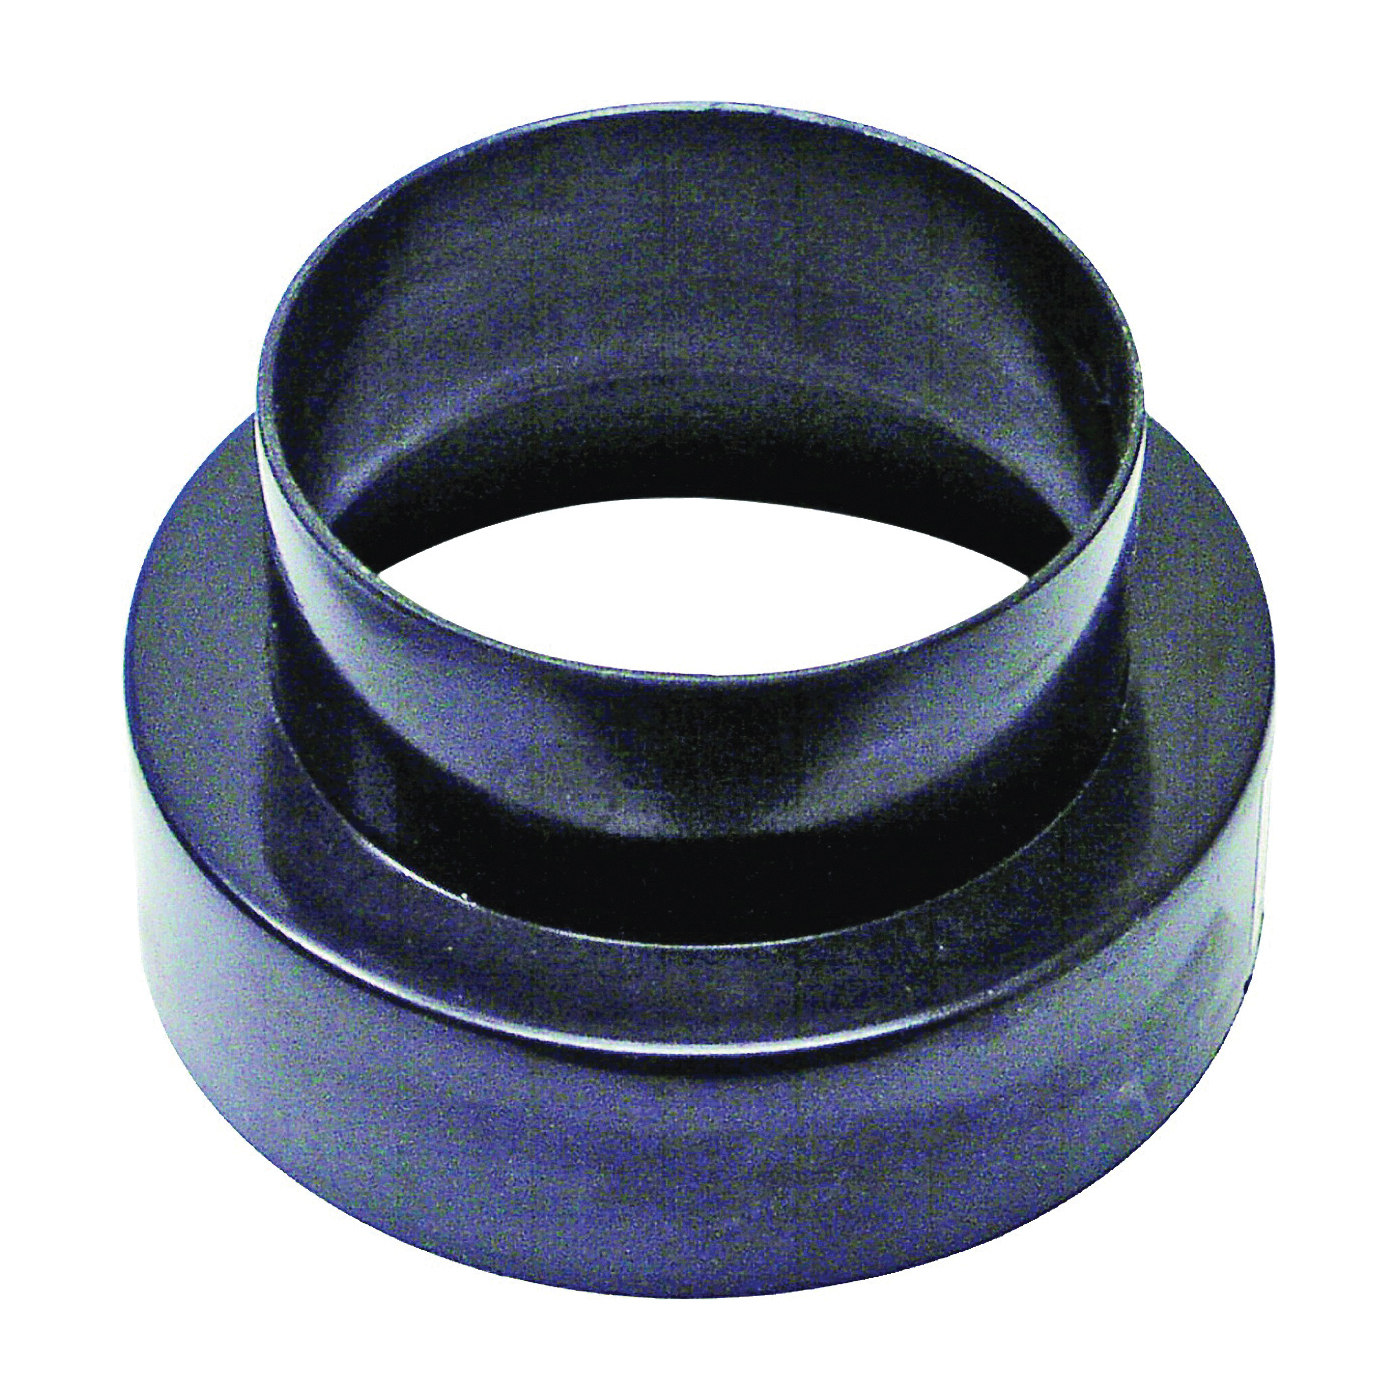 235 Vent Adapter Female (Large End), Female (Large End), Male (Small End), Plastic, Black